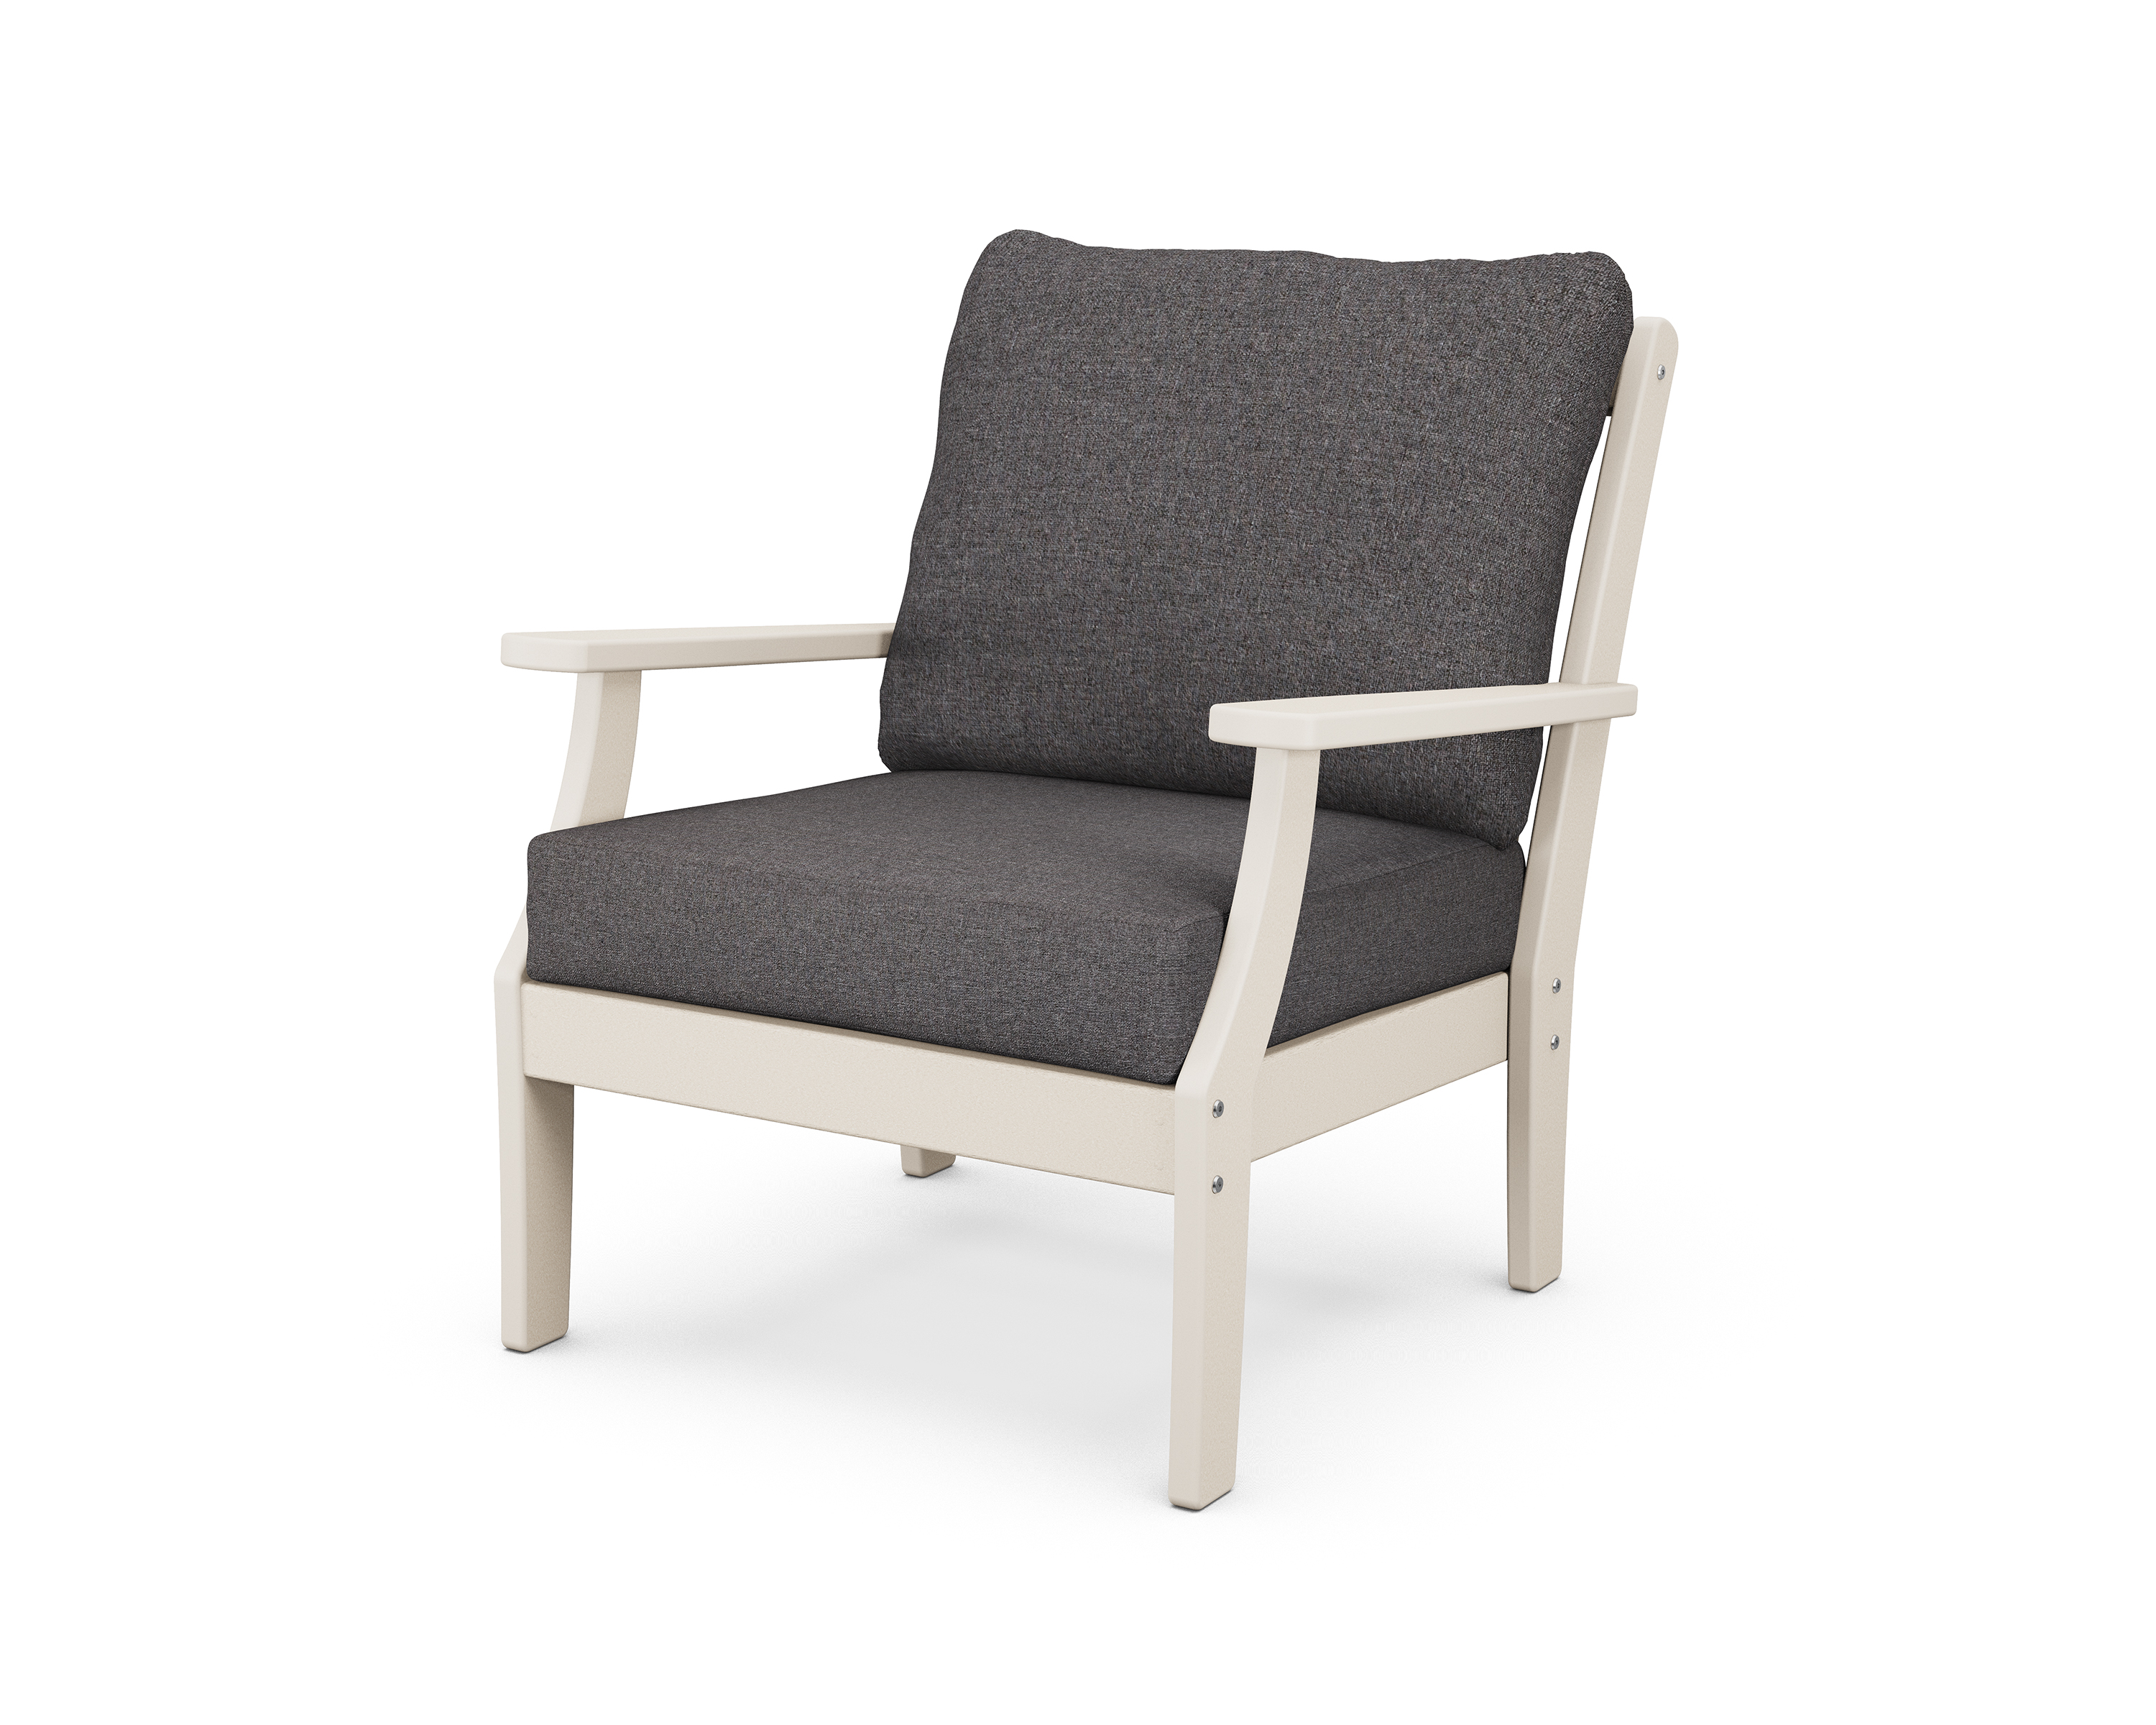 braxton deep seating chair in sand / ash charcoal product image